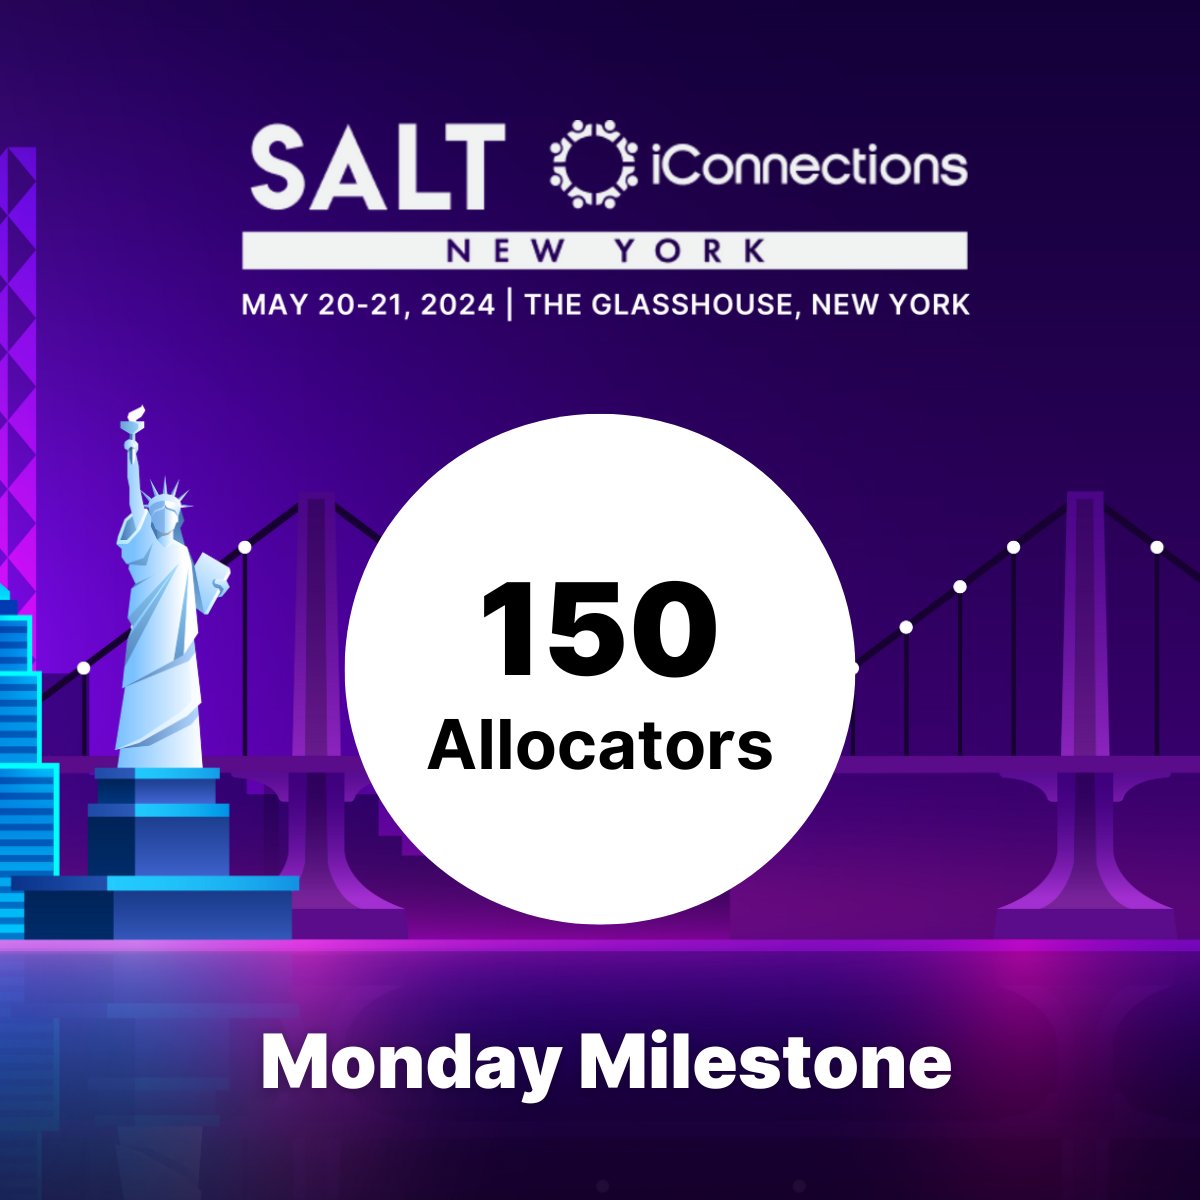 🎉 Monday Milestone | SALT iConnections New York 2024: 150 Allocators Confirmed!

We are eager to announce that over 150 allocators from across the industry have already registered! 🌎
 
#SALTiConnectionsNY2024 #AlternativeInvestments @SALTConference